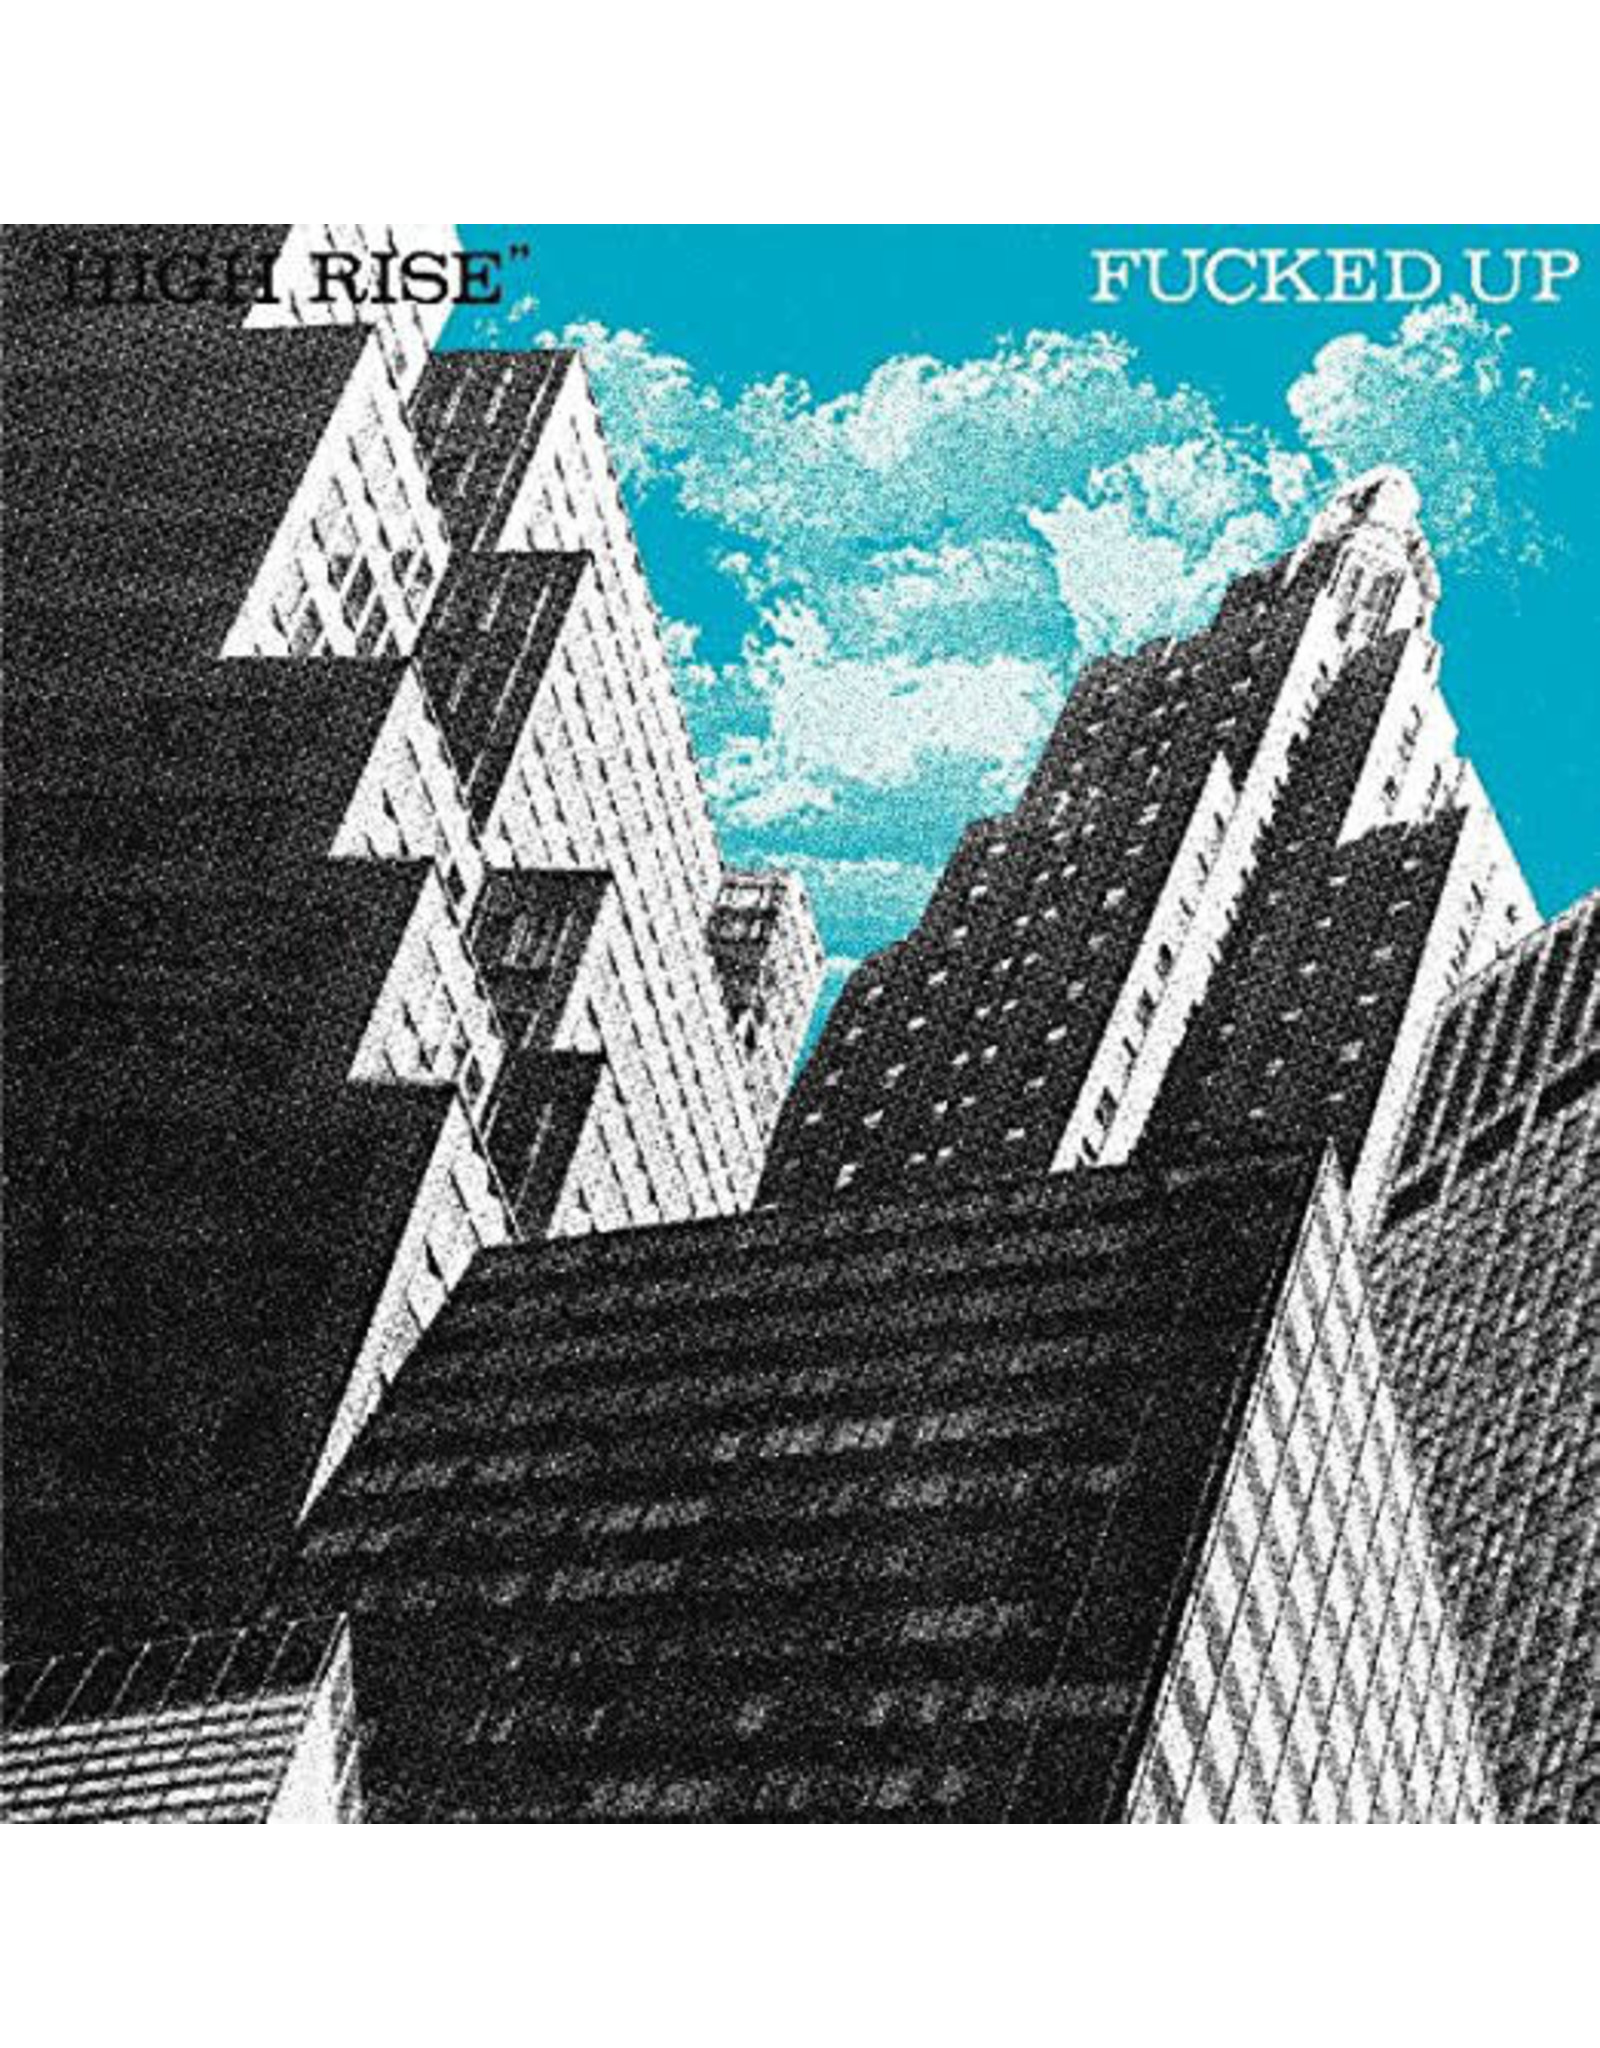 Fucked Up - High Rise/Tower On Time 7"